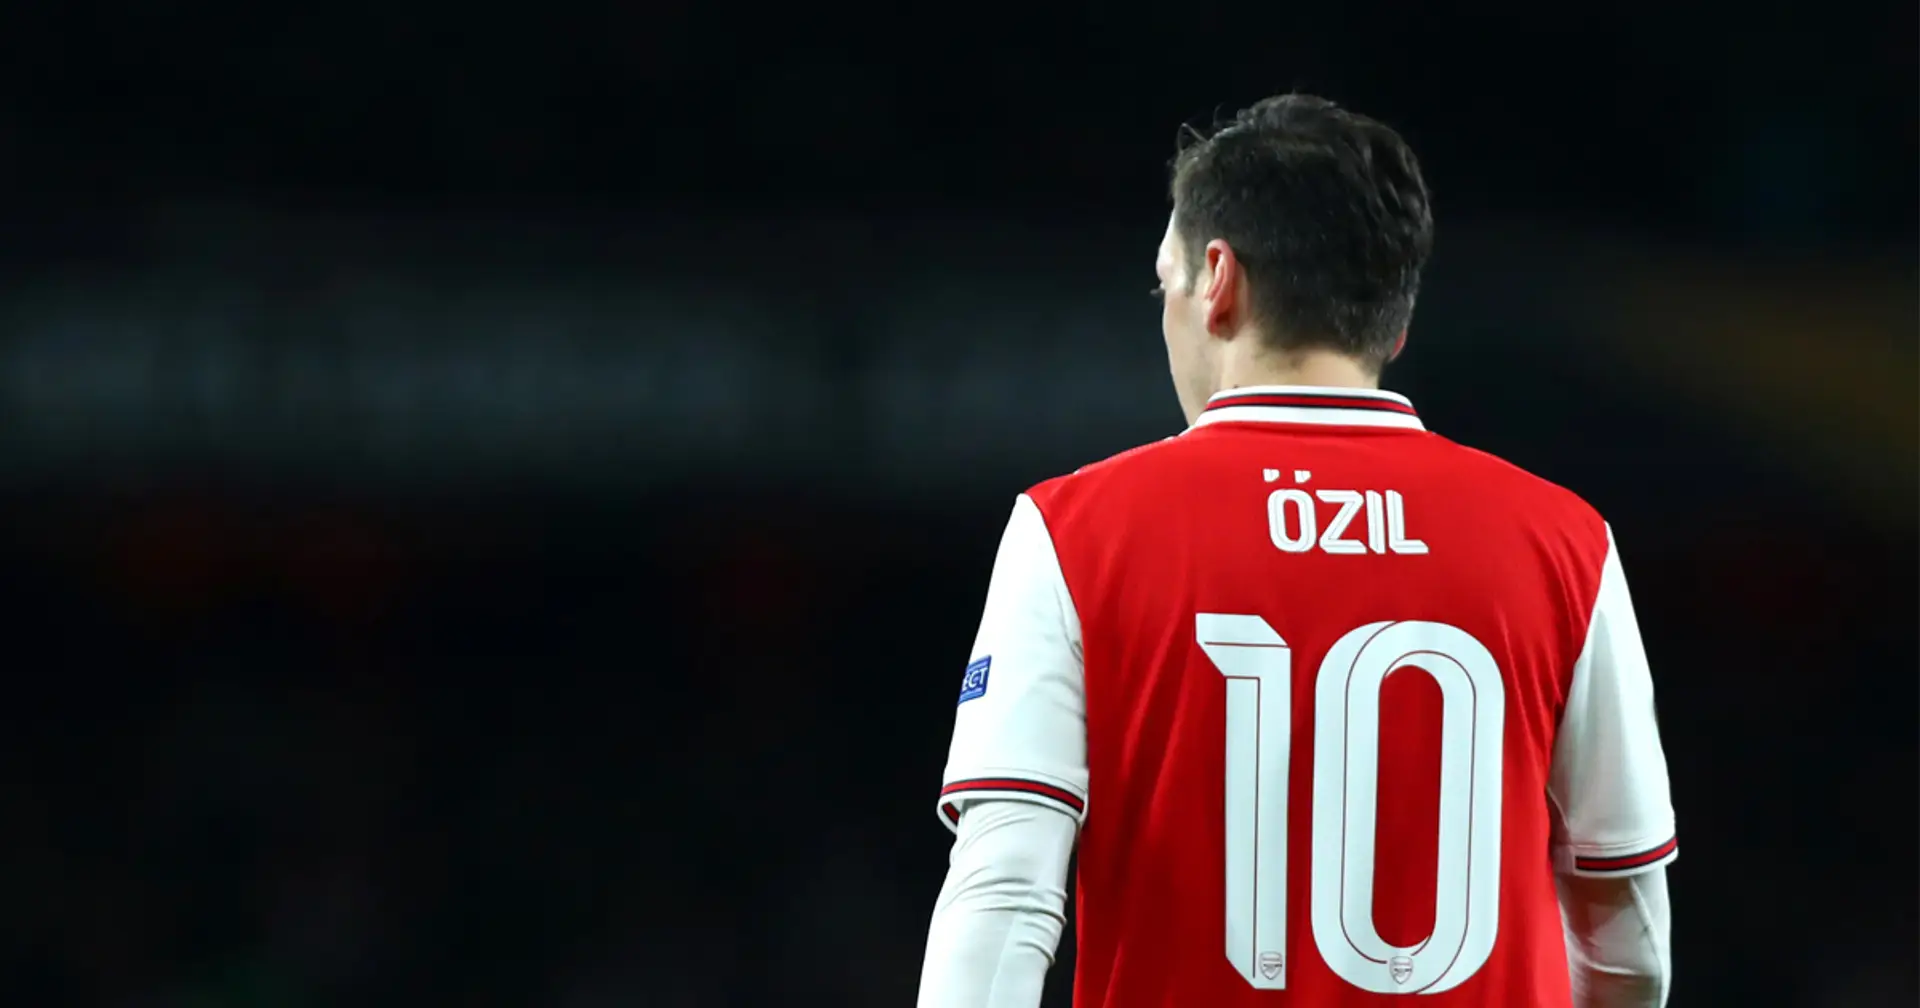 'What a mess. What a shame. What a relief': Arsenal fans react to Ozil's impending exit